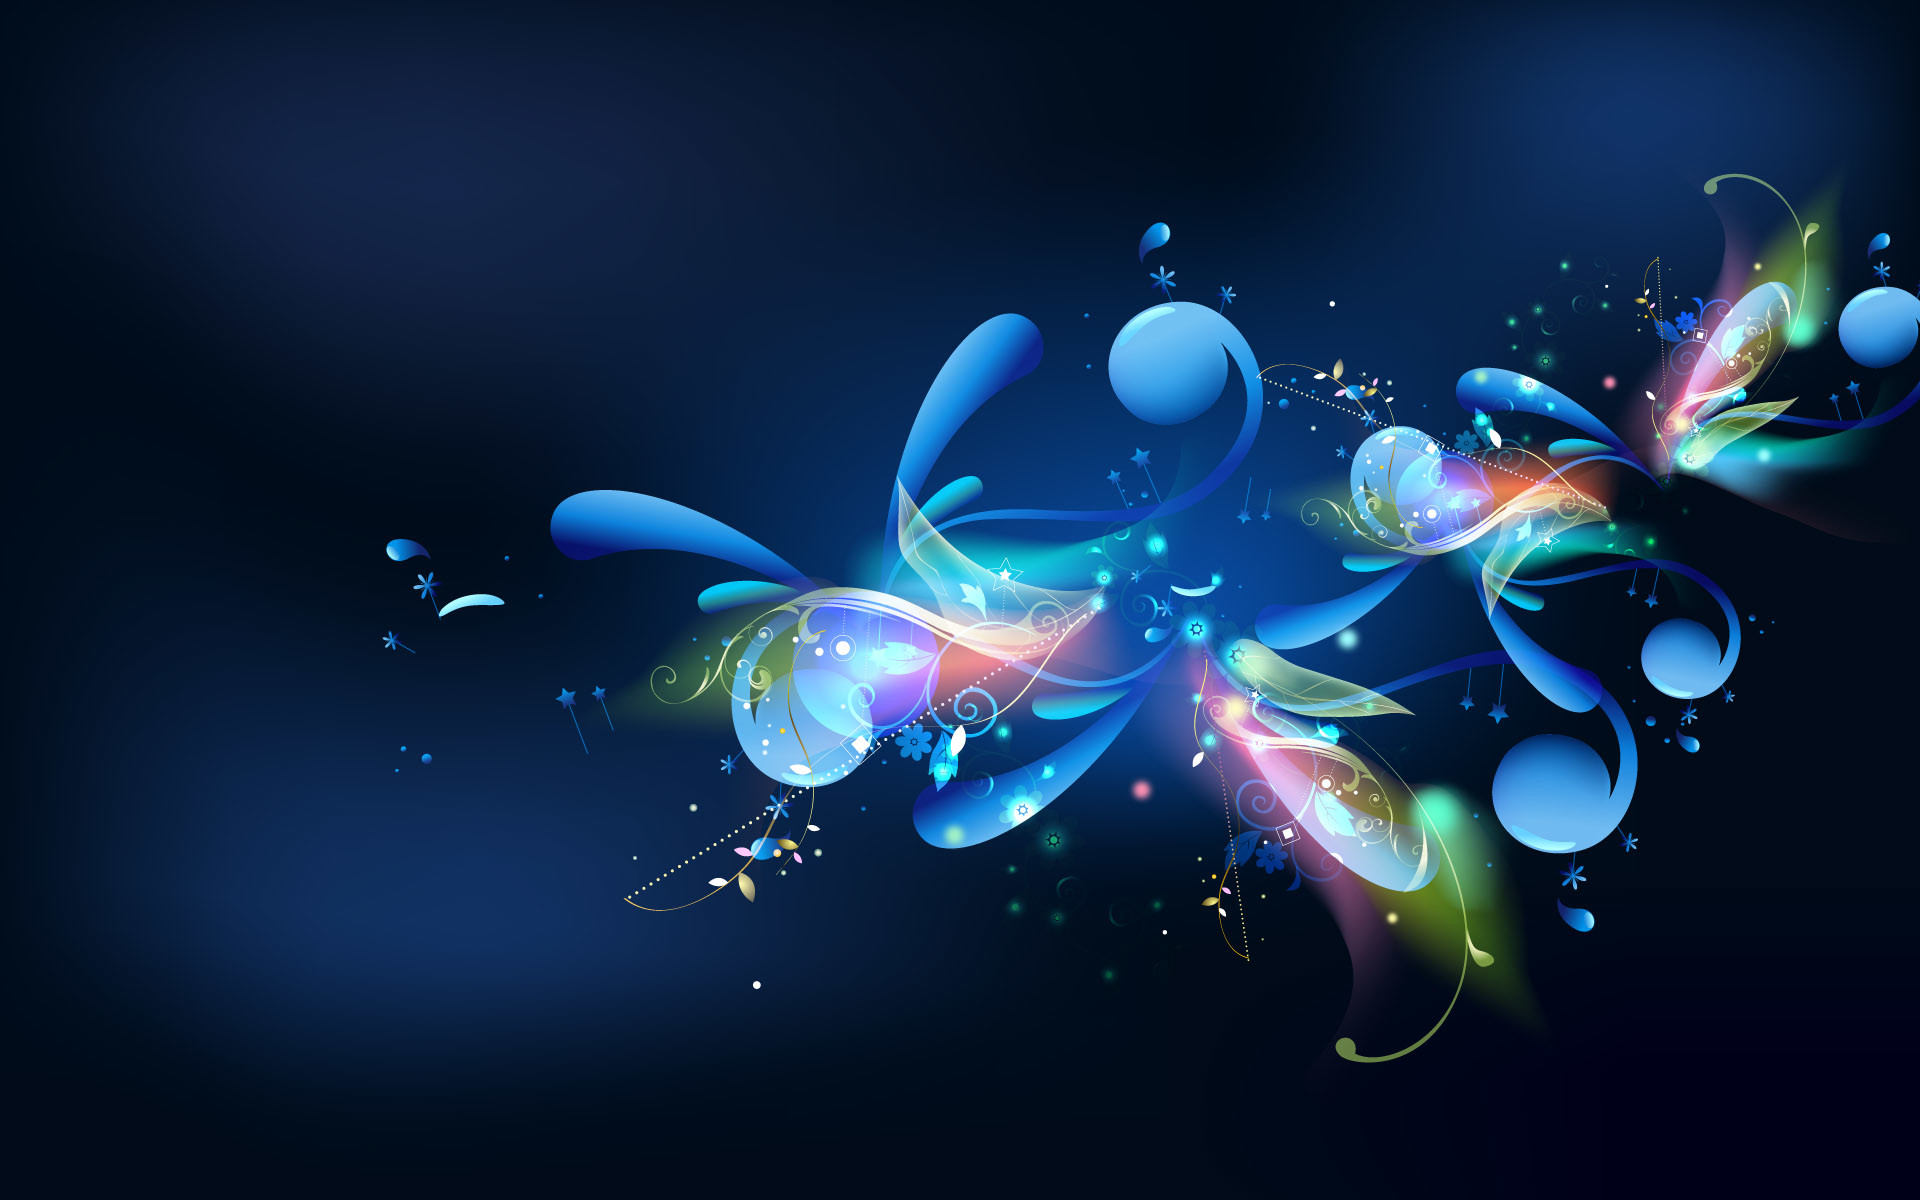 All Blue - Hd Colour Background For Photoshop , HD Wallpaper & Backgrounds